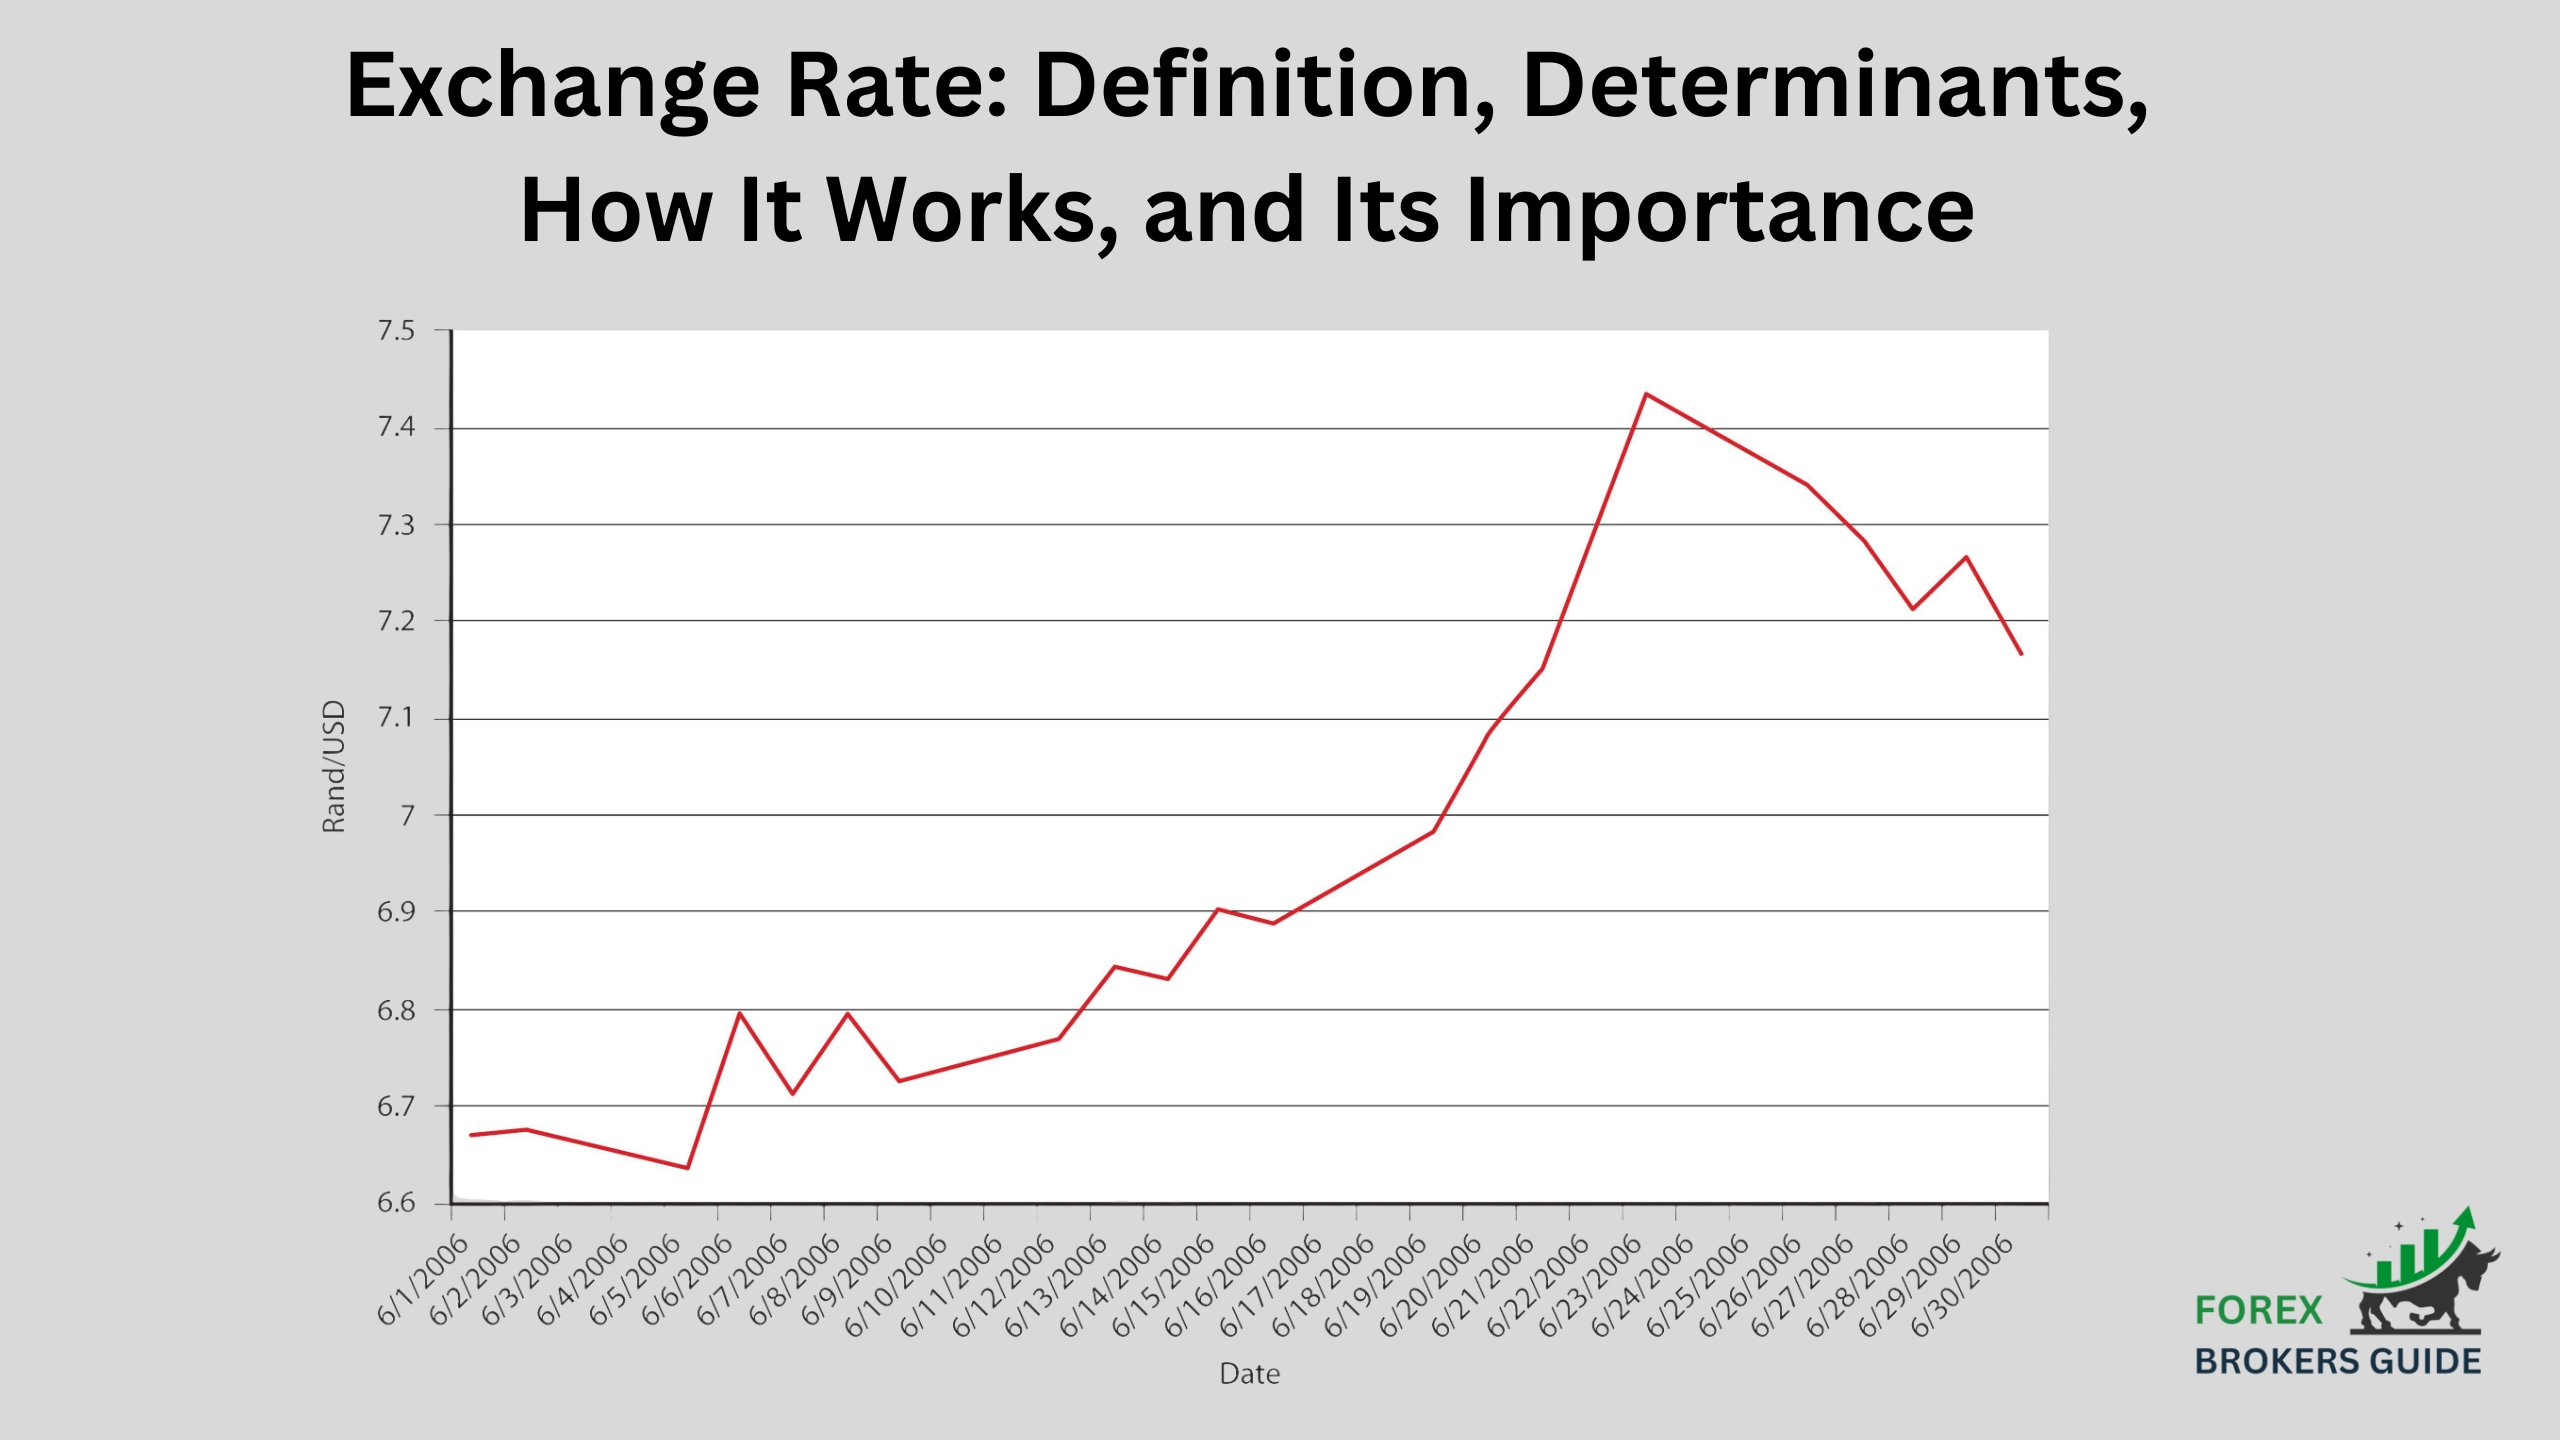 Exchange Rate: Definition, Determinants, How It Works, and Its Importance